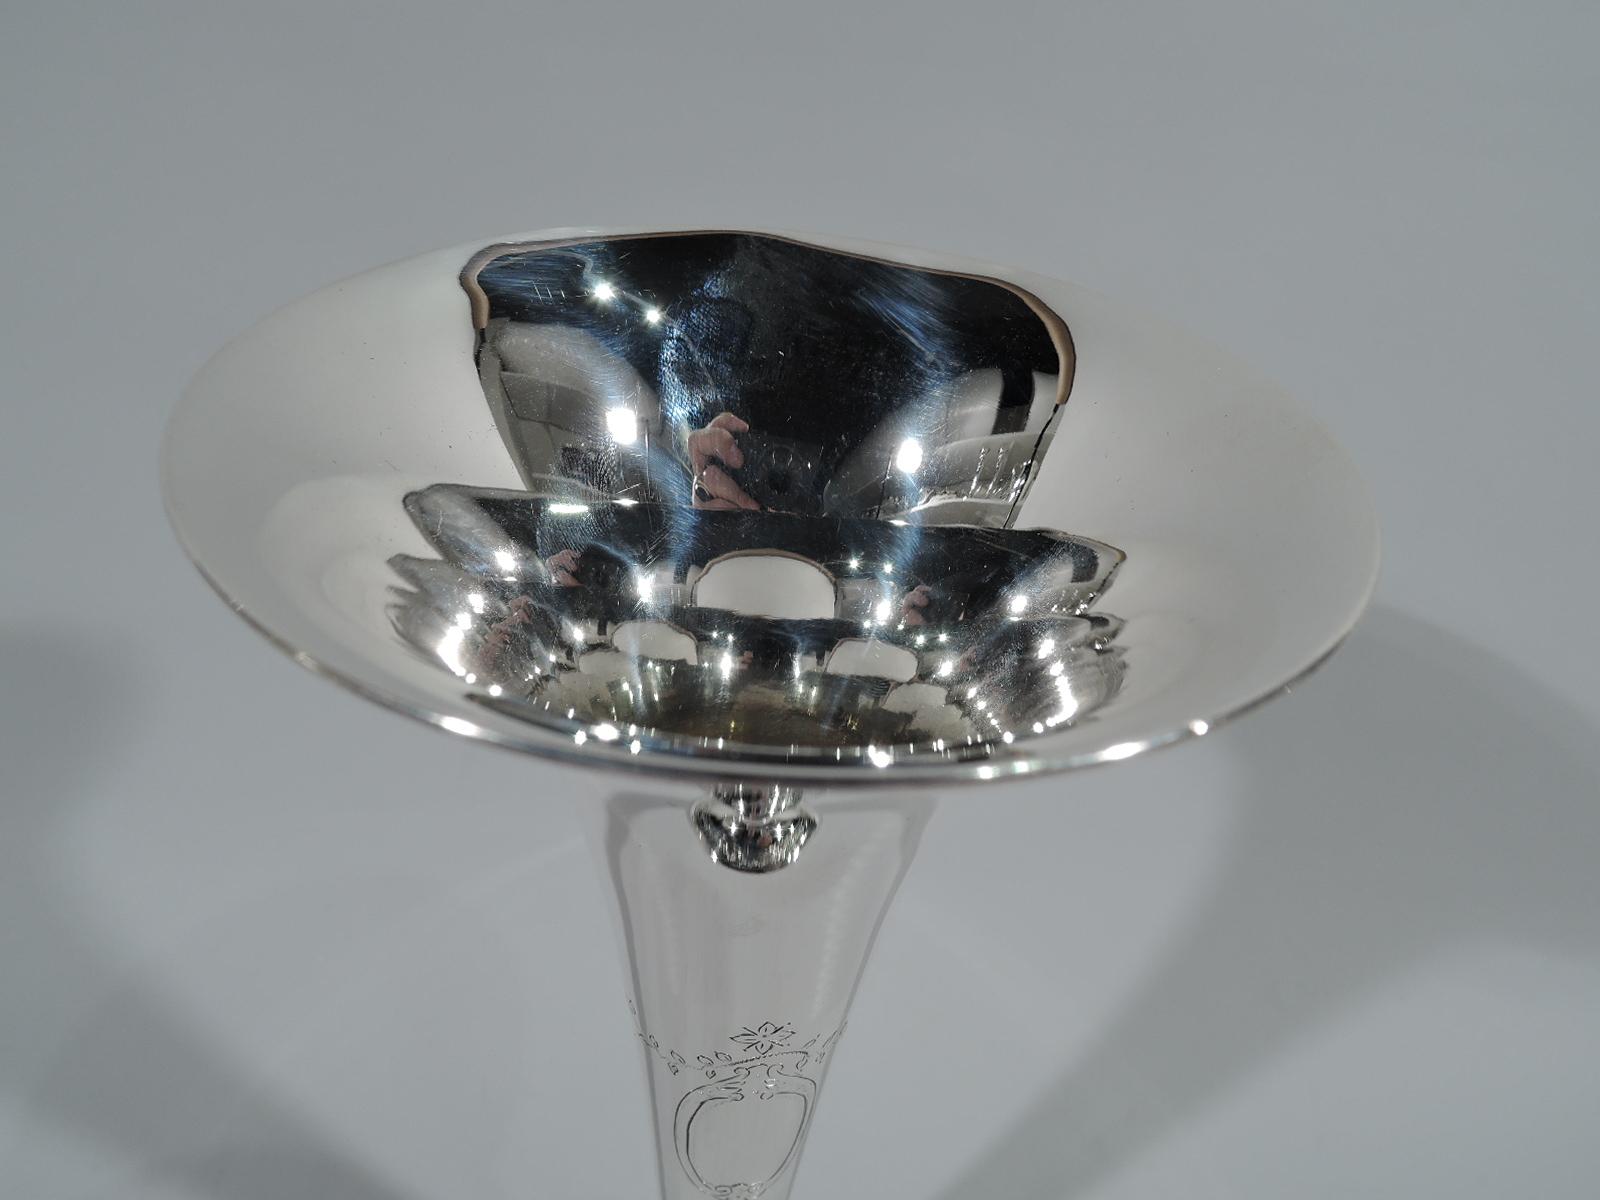 Edwardian sterling silver trumpet vase. Made by Tiffany & Co. in New York, ca 1912. Conical with flared mouth and base knop flowing into gently raised foot. Engraved ornament: Two scrolled oval frames (vacant) with garland and pendant flowers on